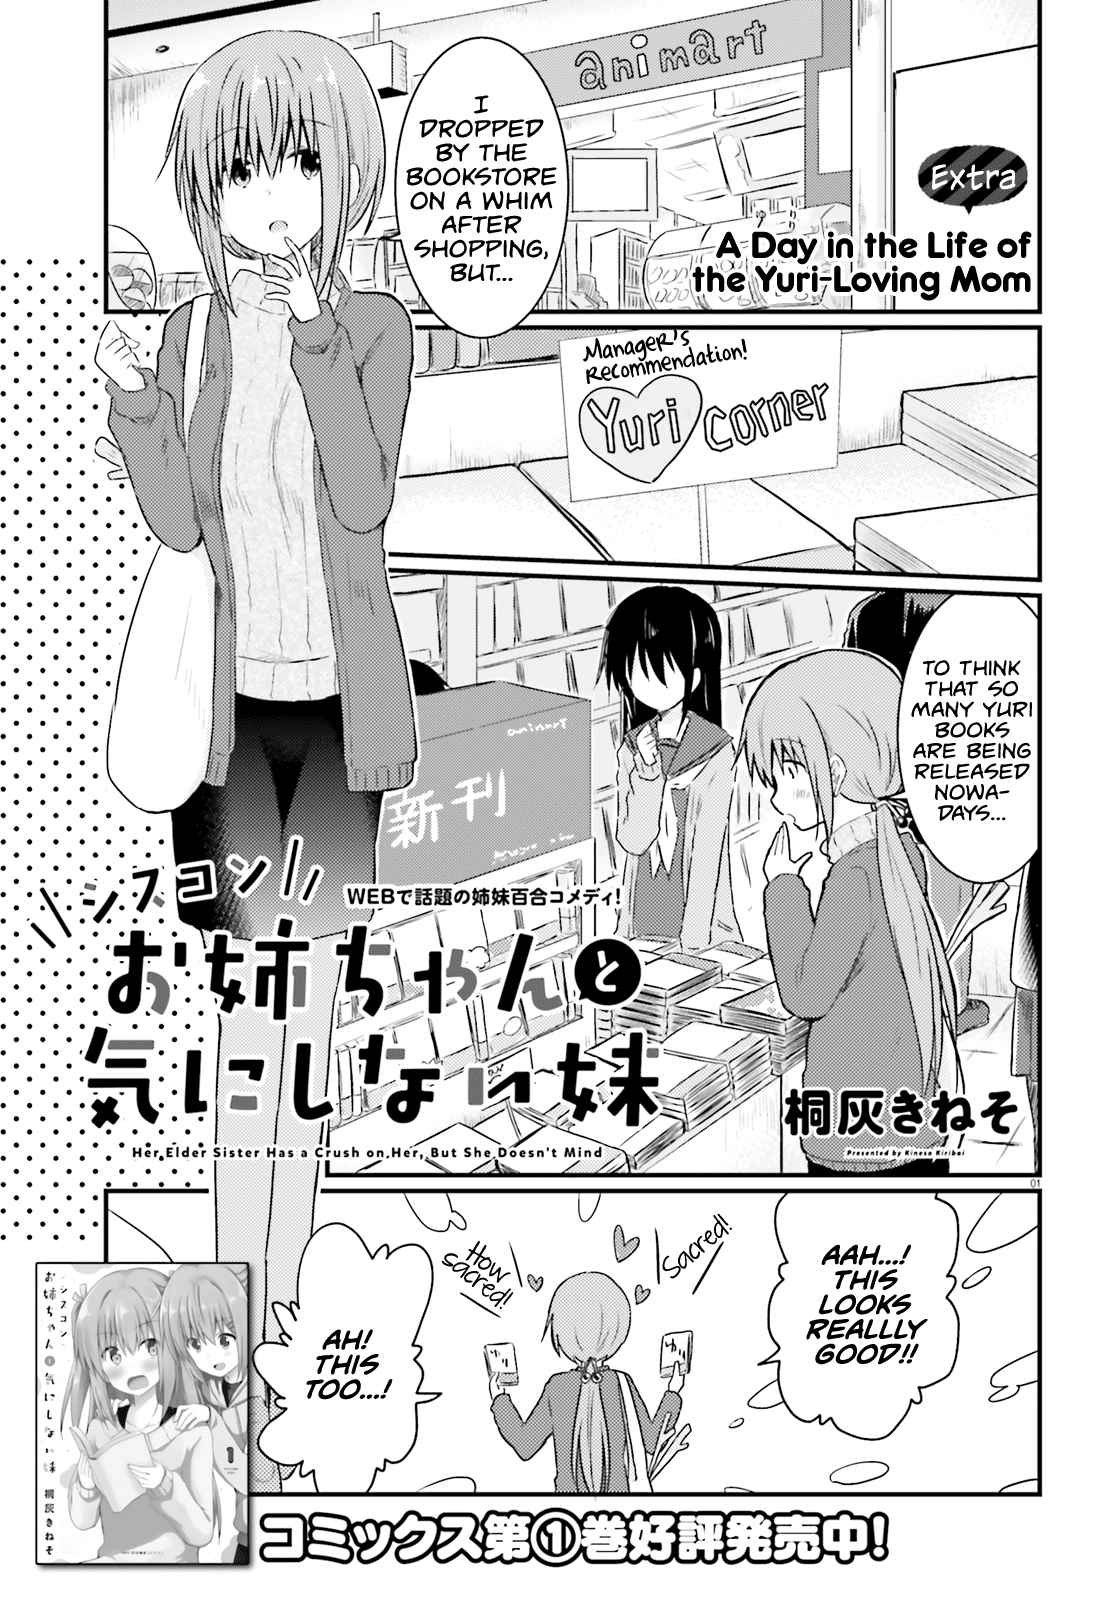 Her Elder Sister Has a Crush on Her, But She Doesn't Mind. Ch. 8.5 A Day in the Life of the Yuri Loving Mom